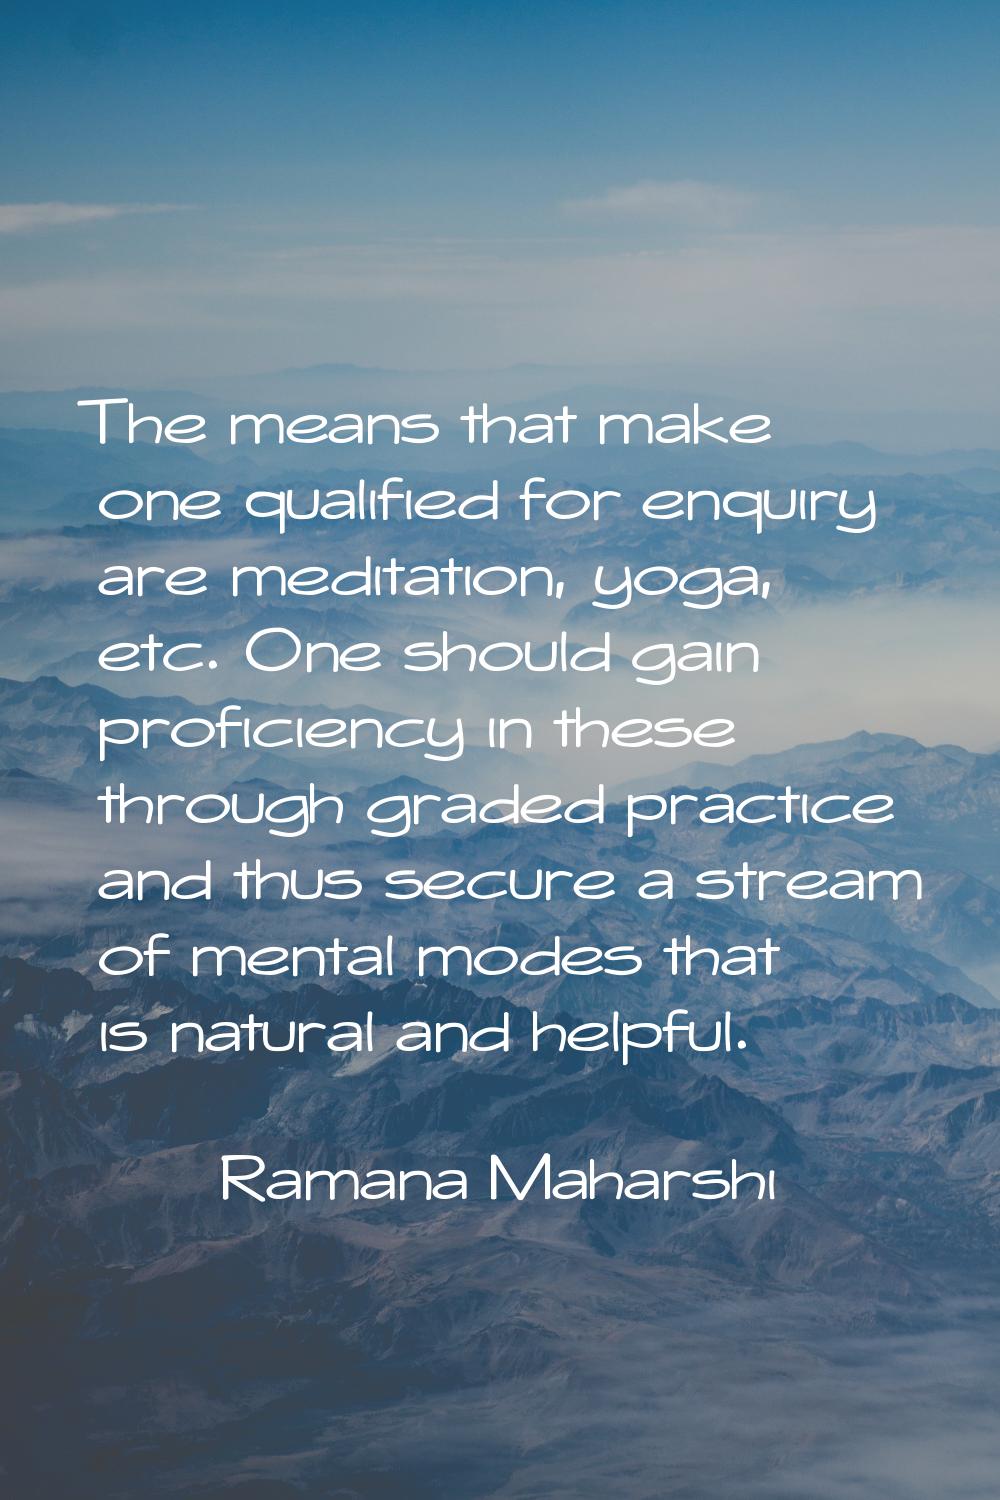 The means that make one qualified for enquiry are meditation, yoga, etc. One should gain proficienc